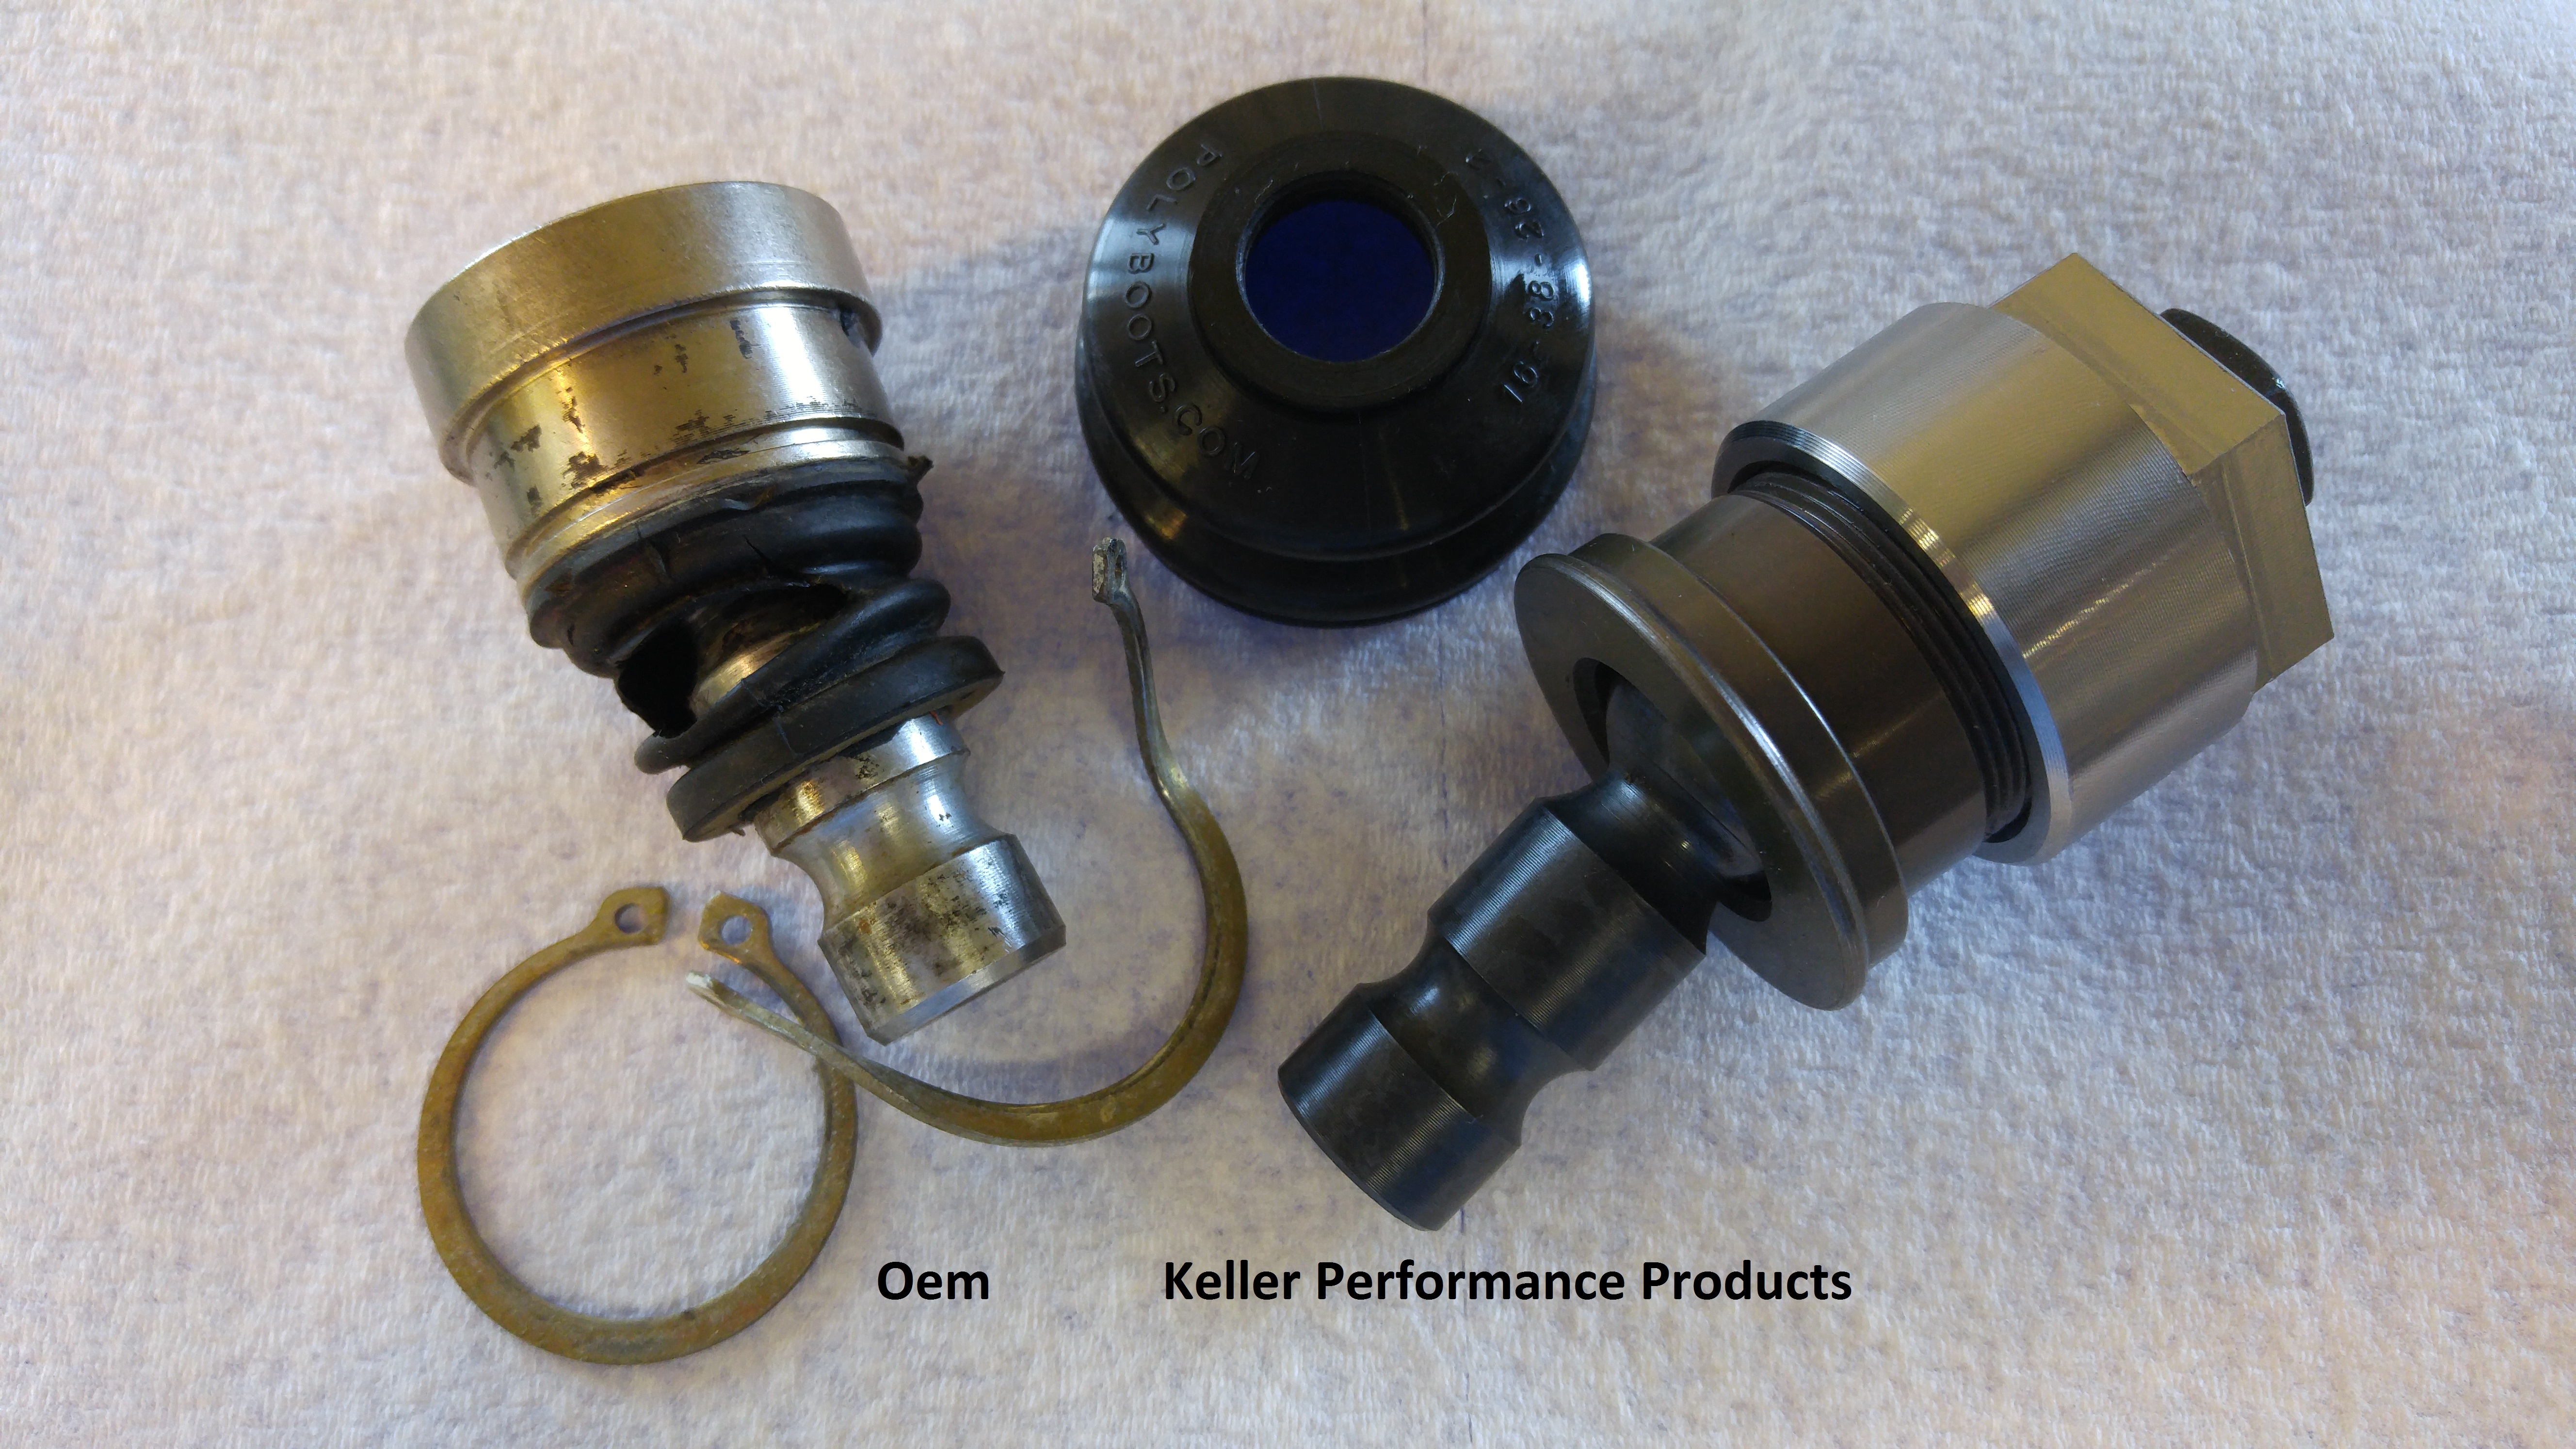 Keller Performance Products Ball Joints